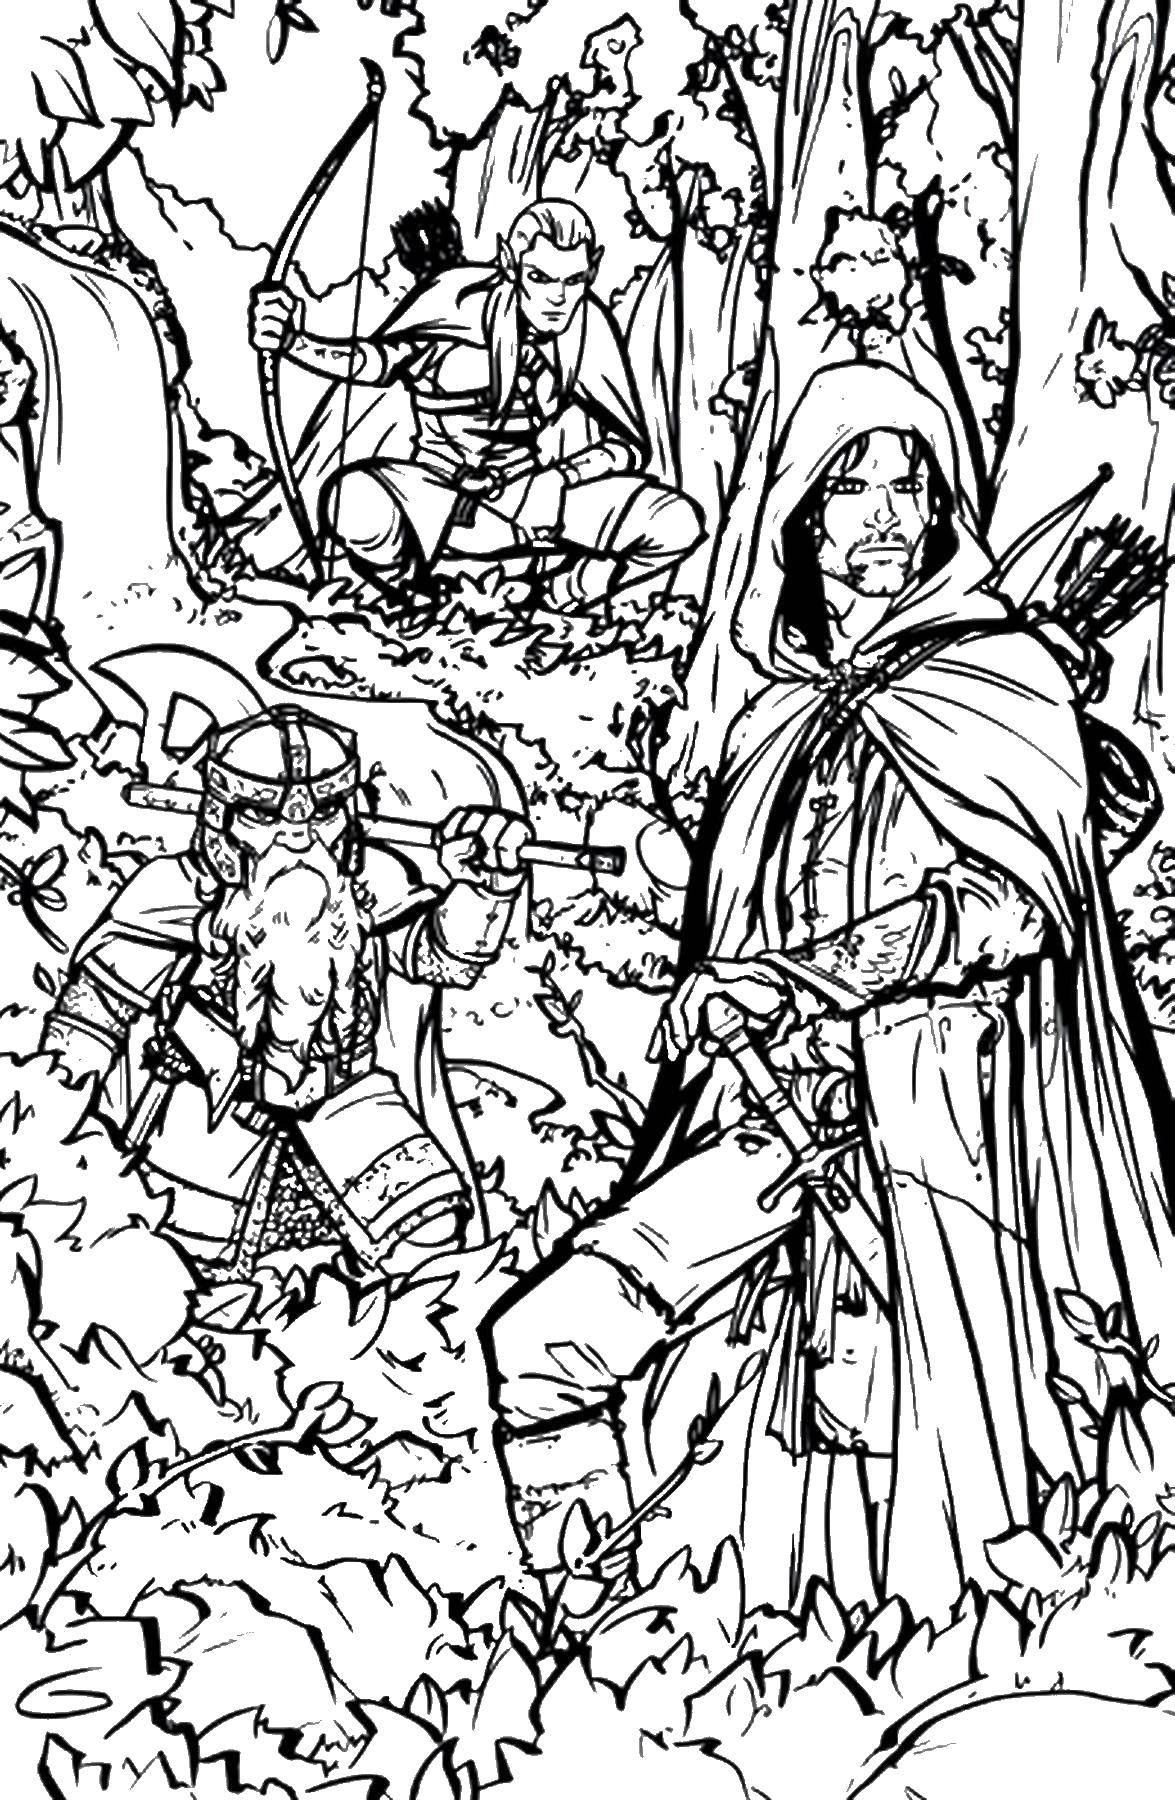 Coloring Legolas and Gimli in the forest. Category Lord of the rings. Tags:  Lord of the rings, Legolas, Gimli.